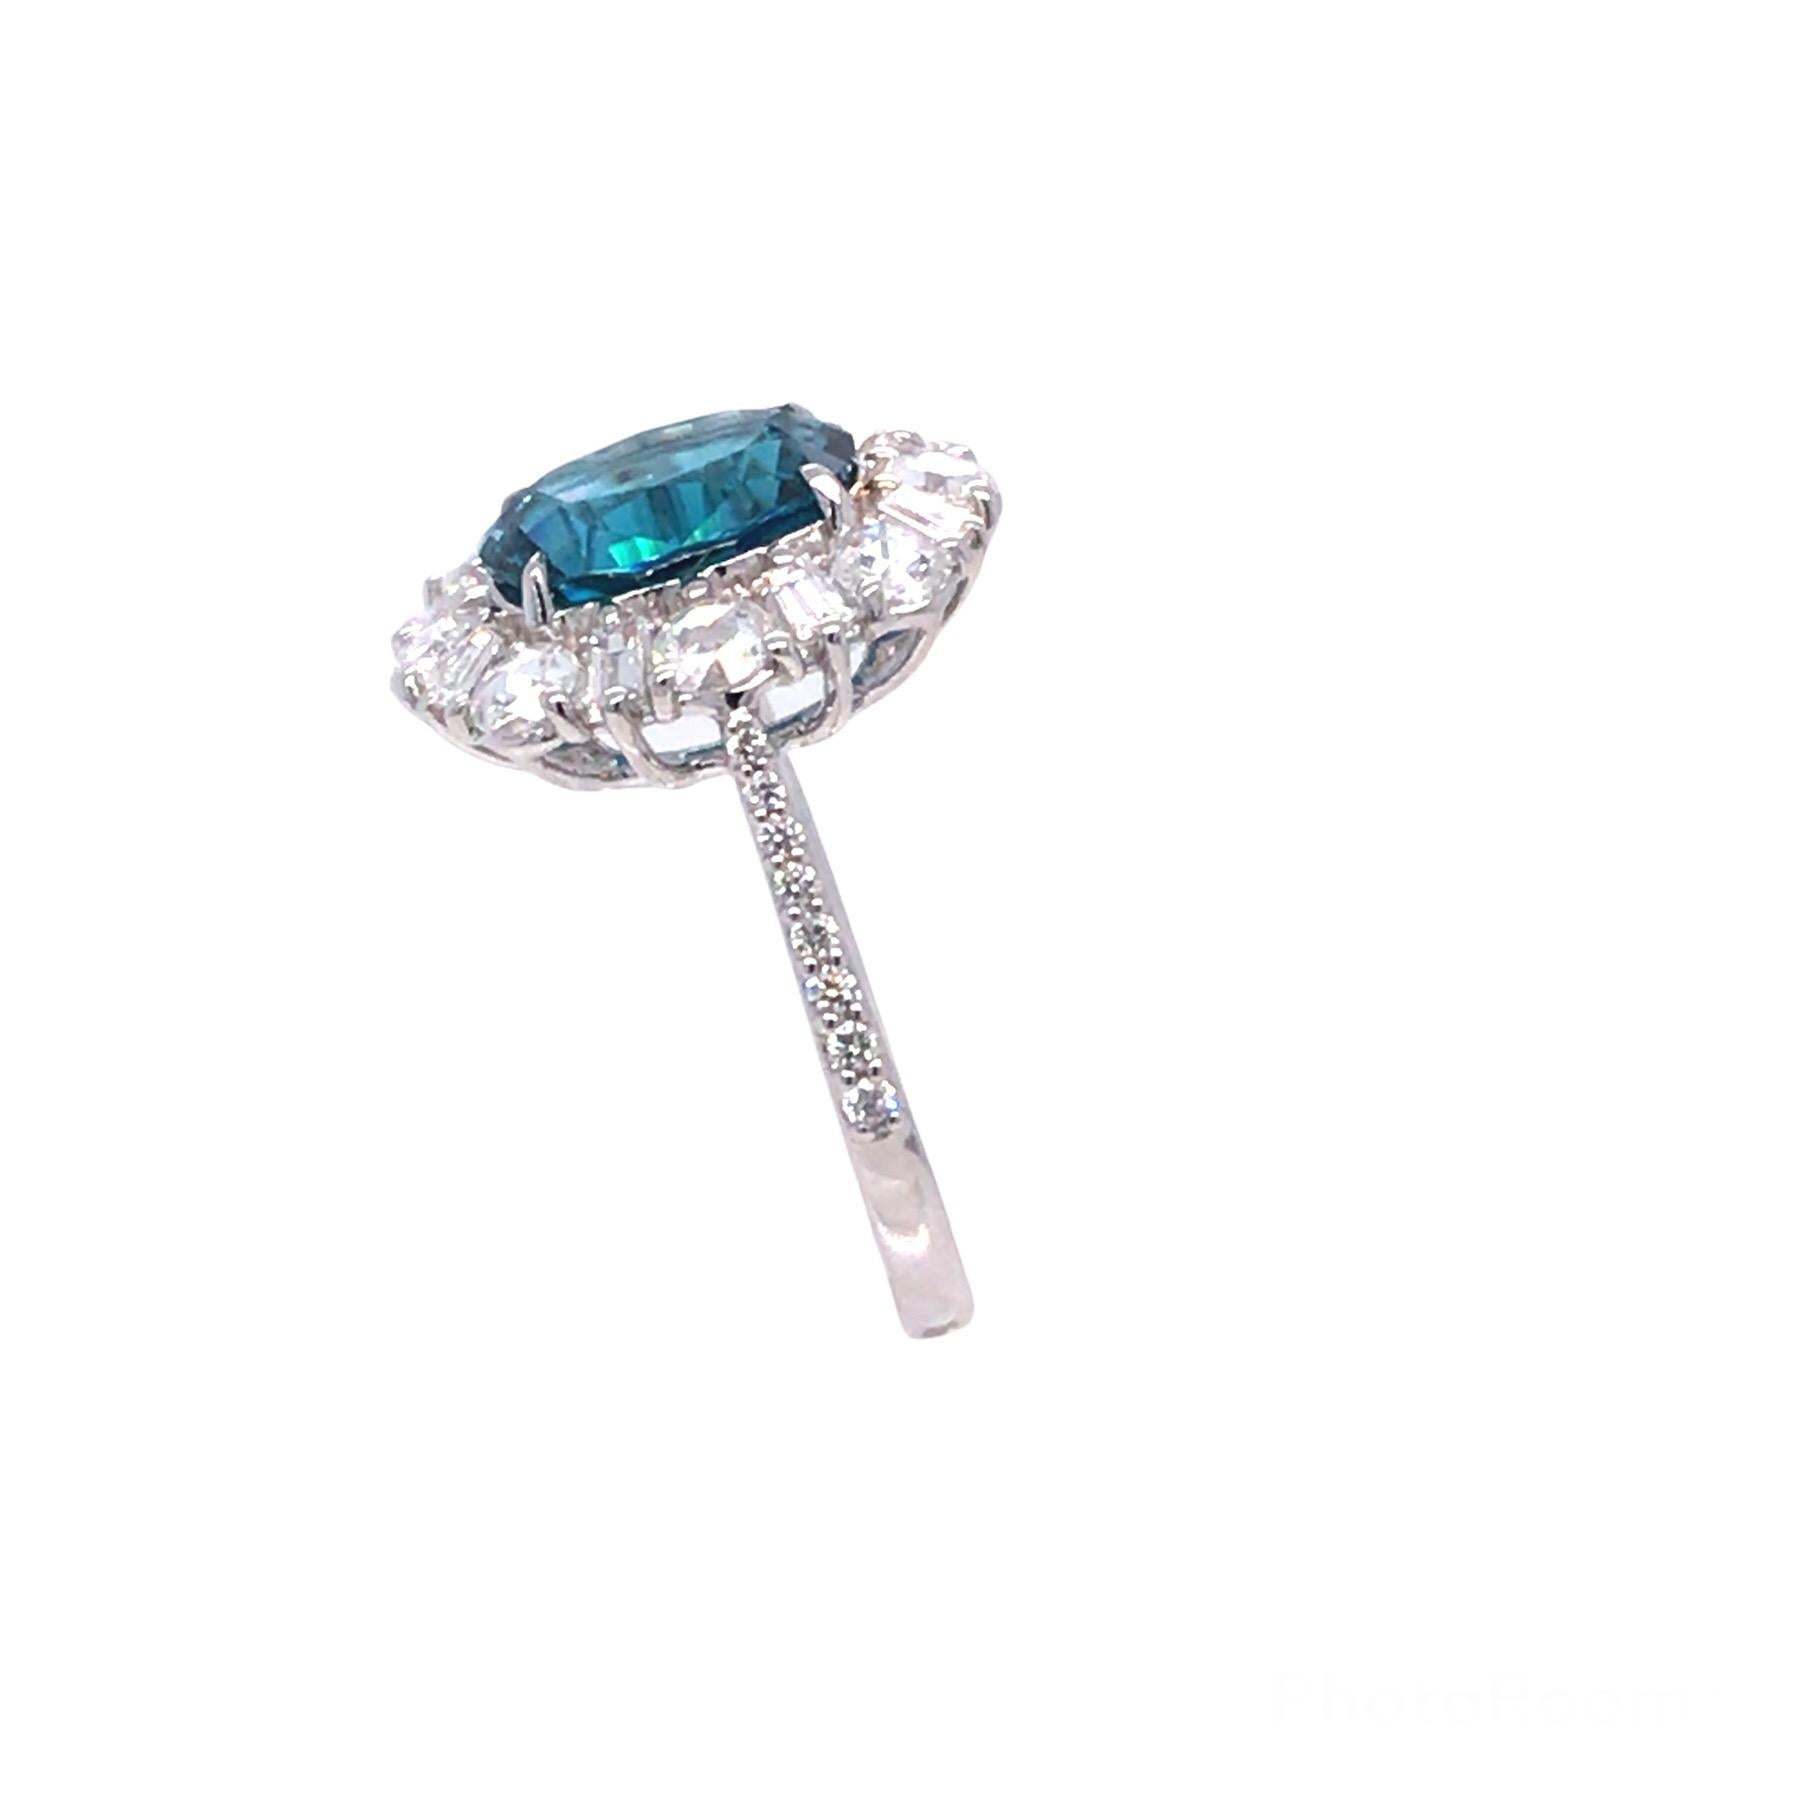 Indulge in elegance and sophistication with this exquisite ring boasting a captivating 4.08 carat oval cut blue zircon center, evoking a celestial aura with its mesmerizing hue. Encircled by a breathtaking halo of alternating round and baguette